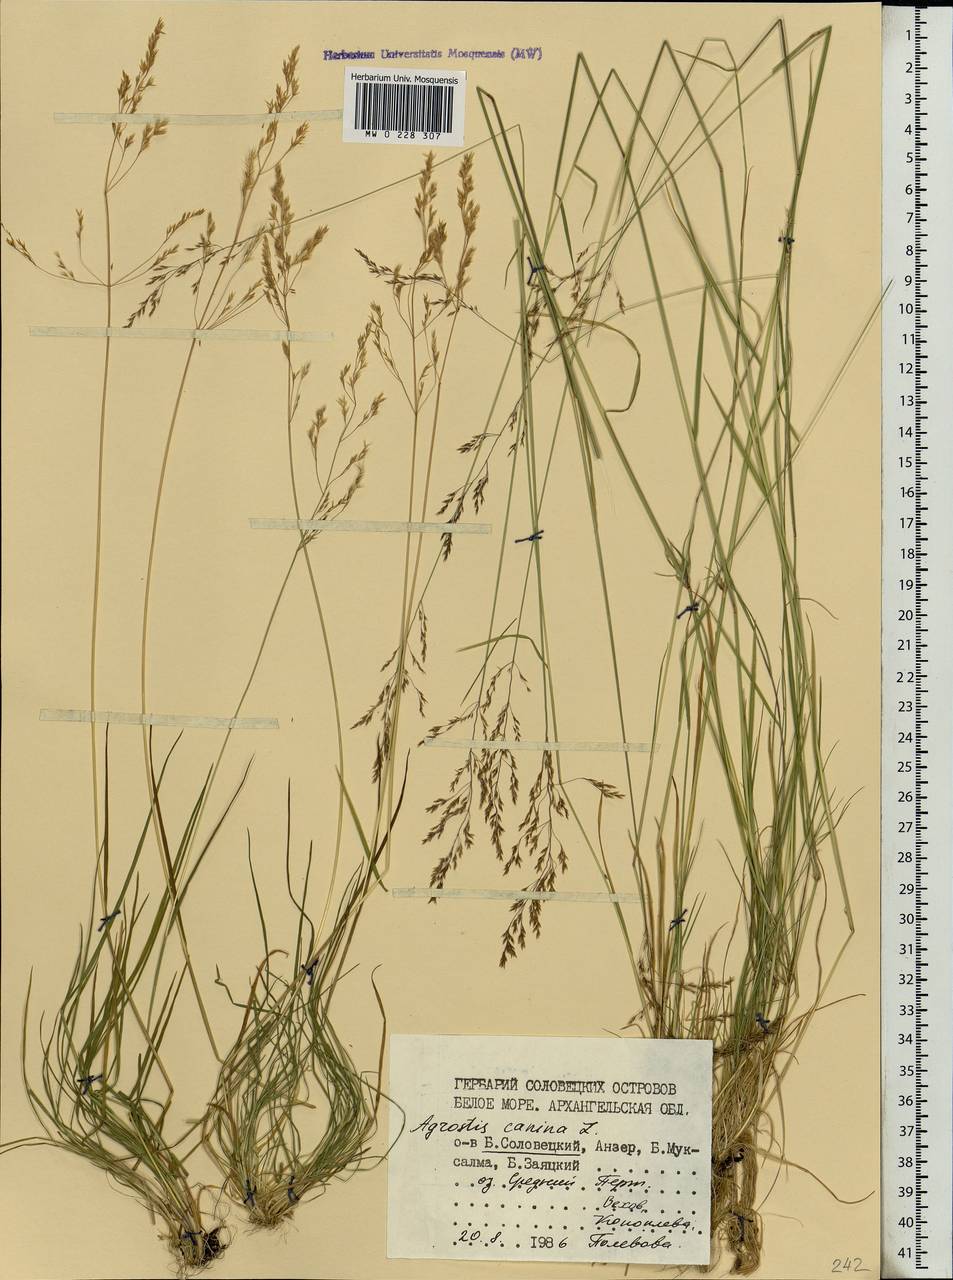 Agrostis canina L., Eastern Europe, Northern region (E1) (Russia)